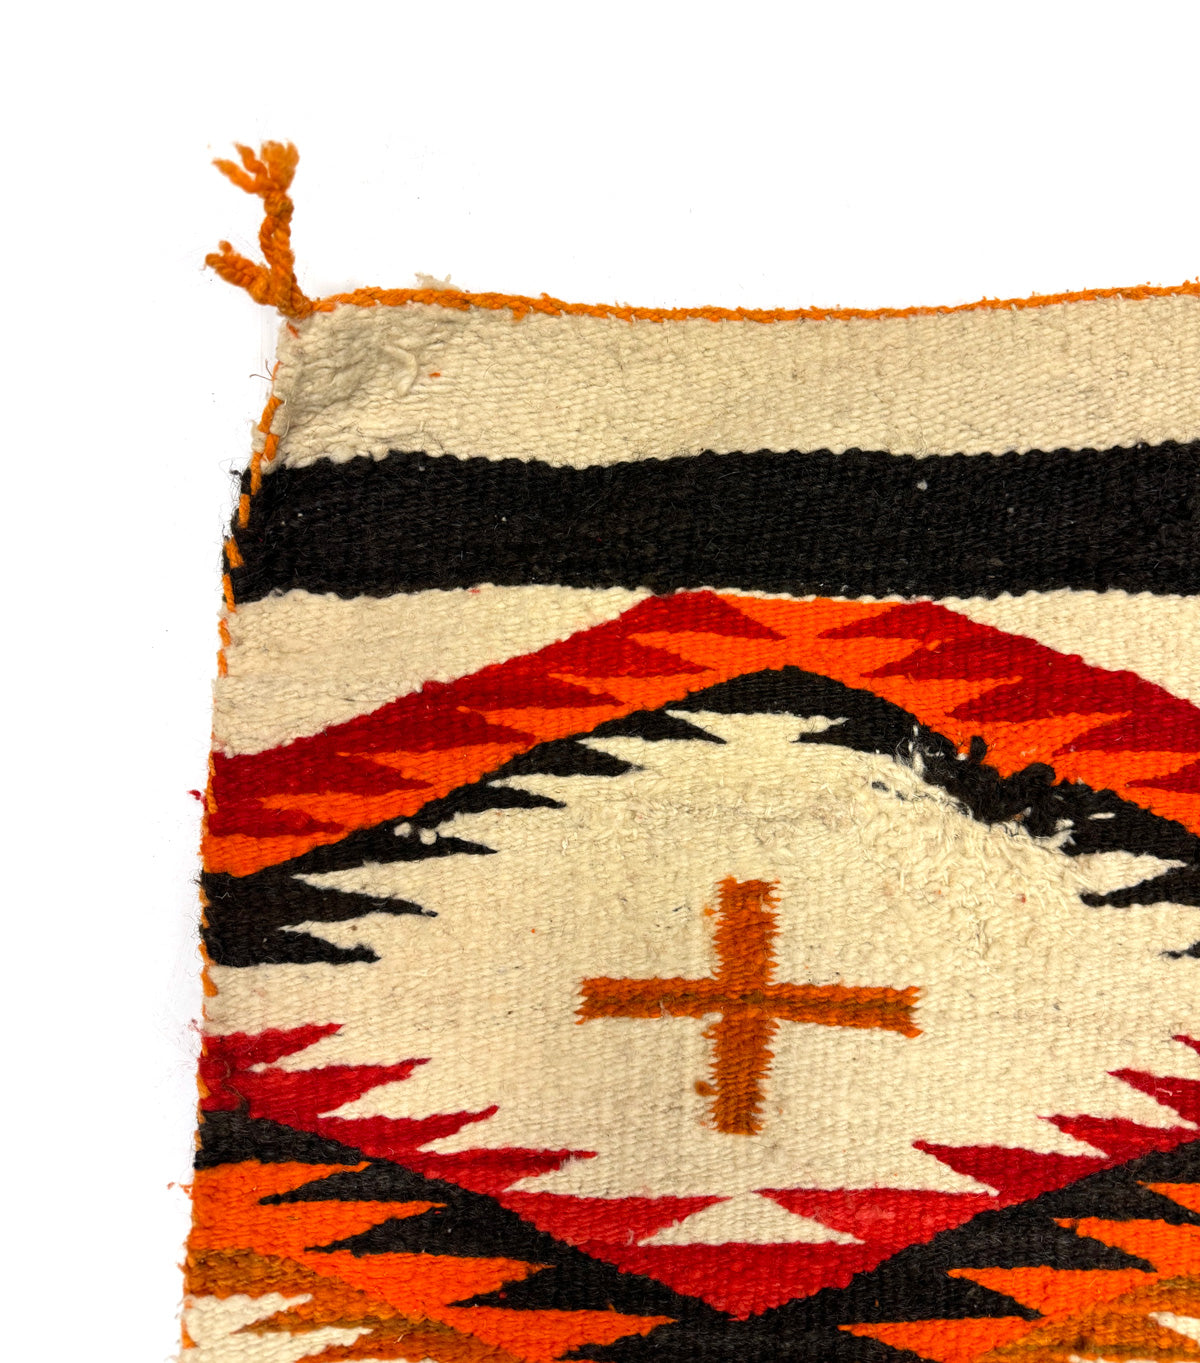 Navajo Transitional Blanket with Hand-Spun Wool c. 1890-1900s, 74" x 34" (T92253-1123-001)